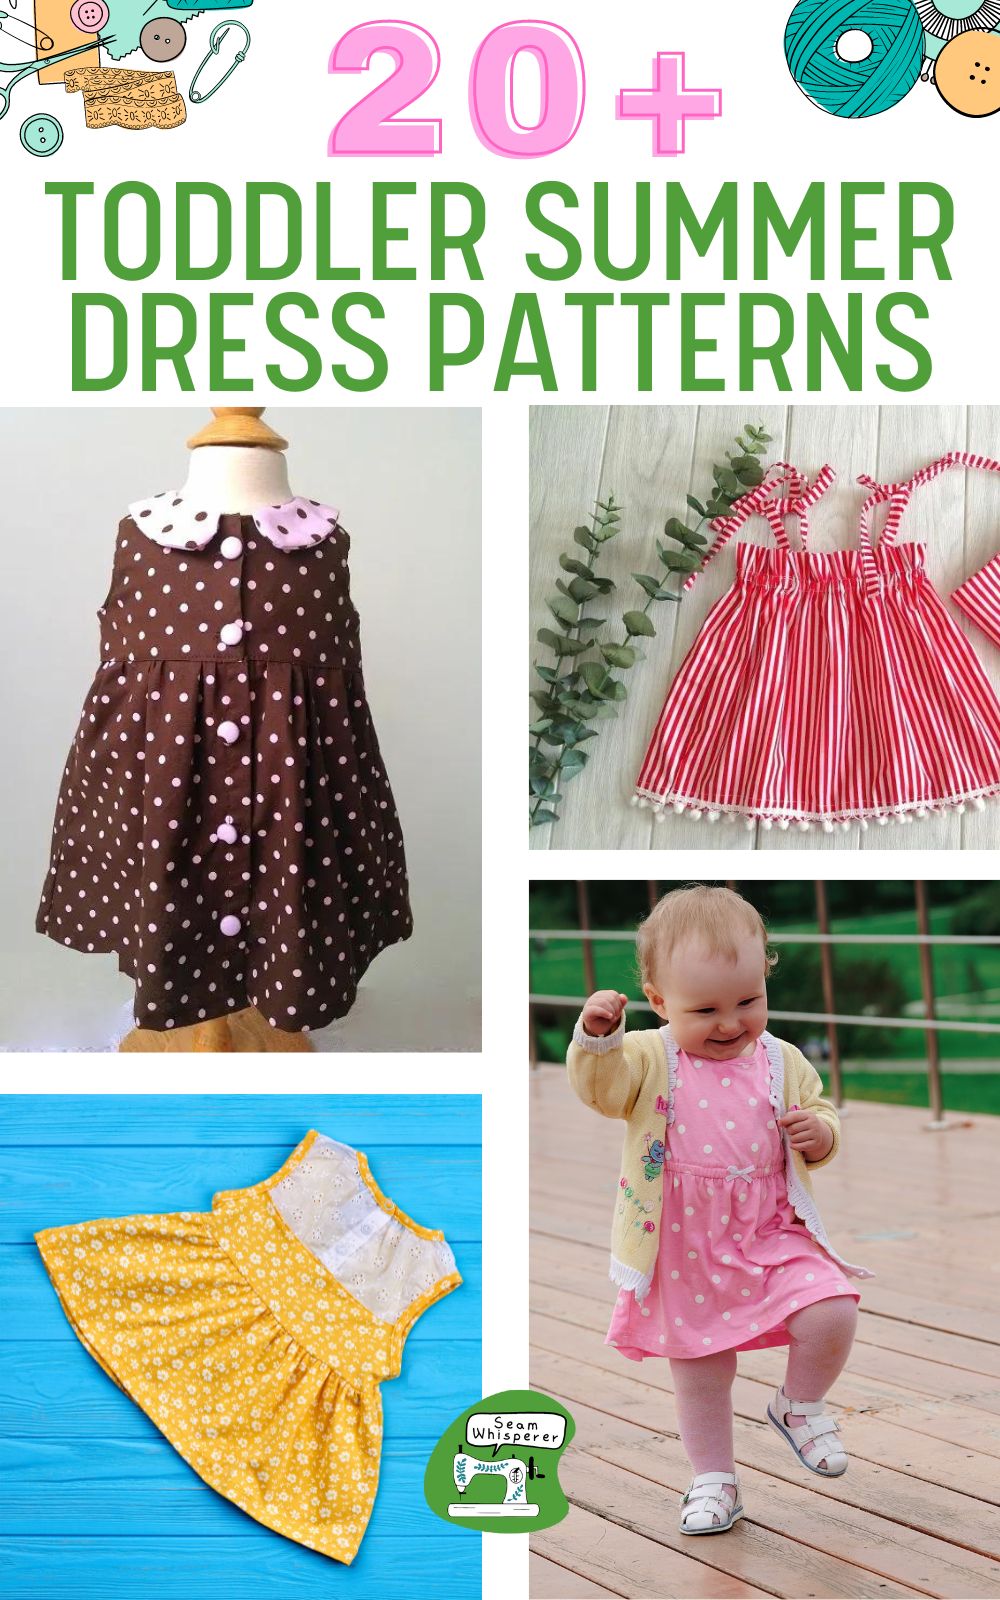 Easy Crochet Baby Dress Pattern (Free) - Taking the next step in your  Crocheting Journey